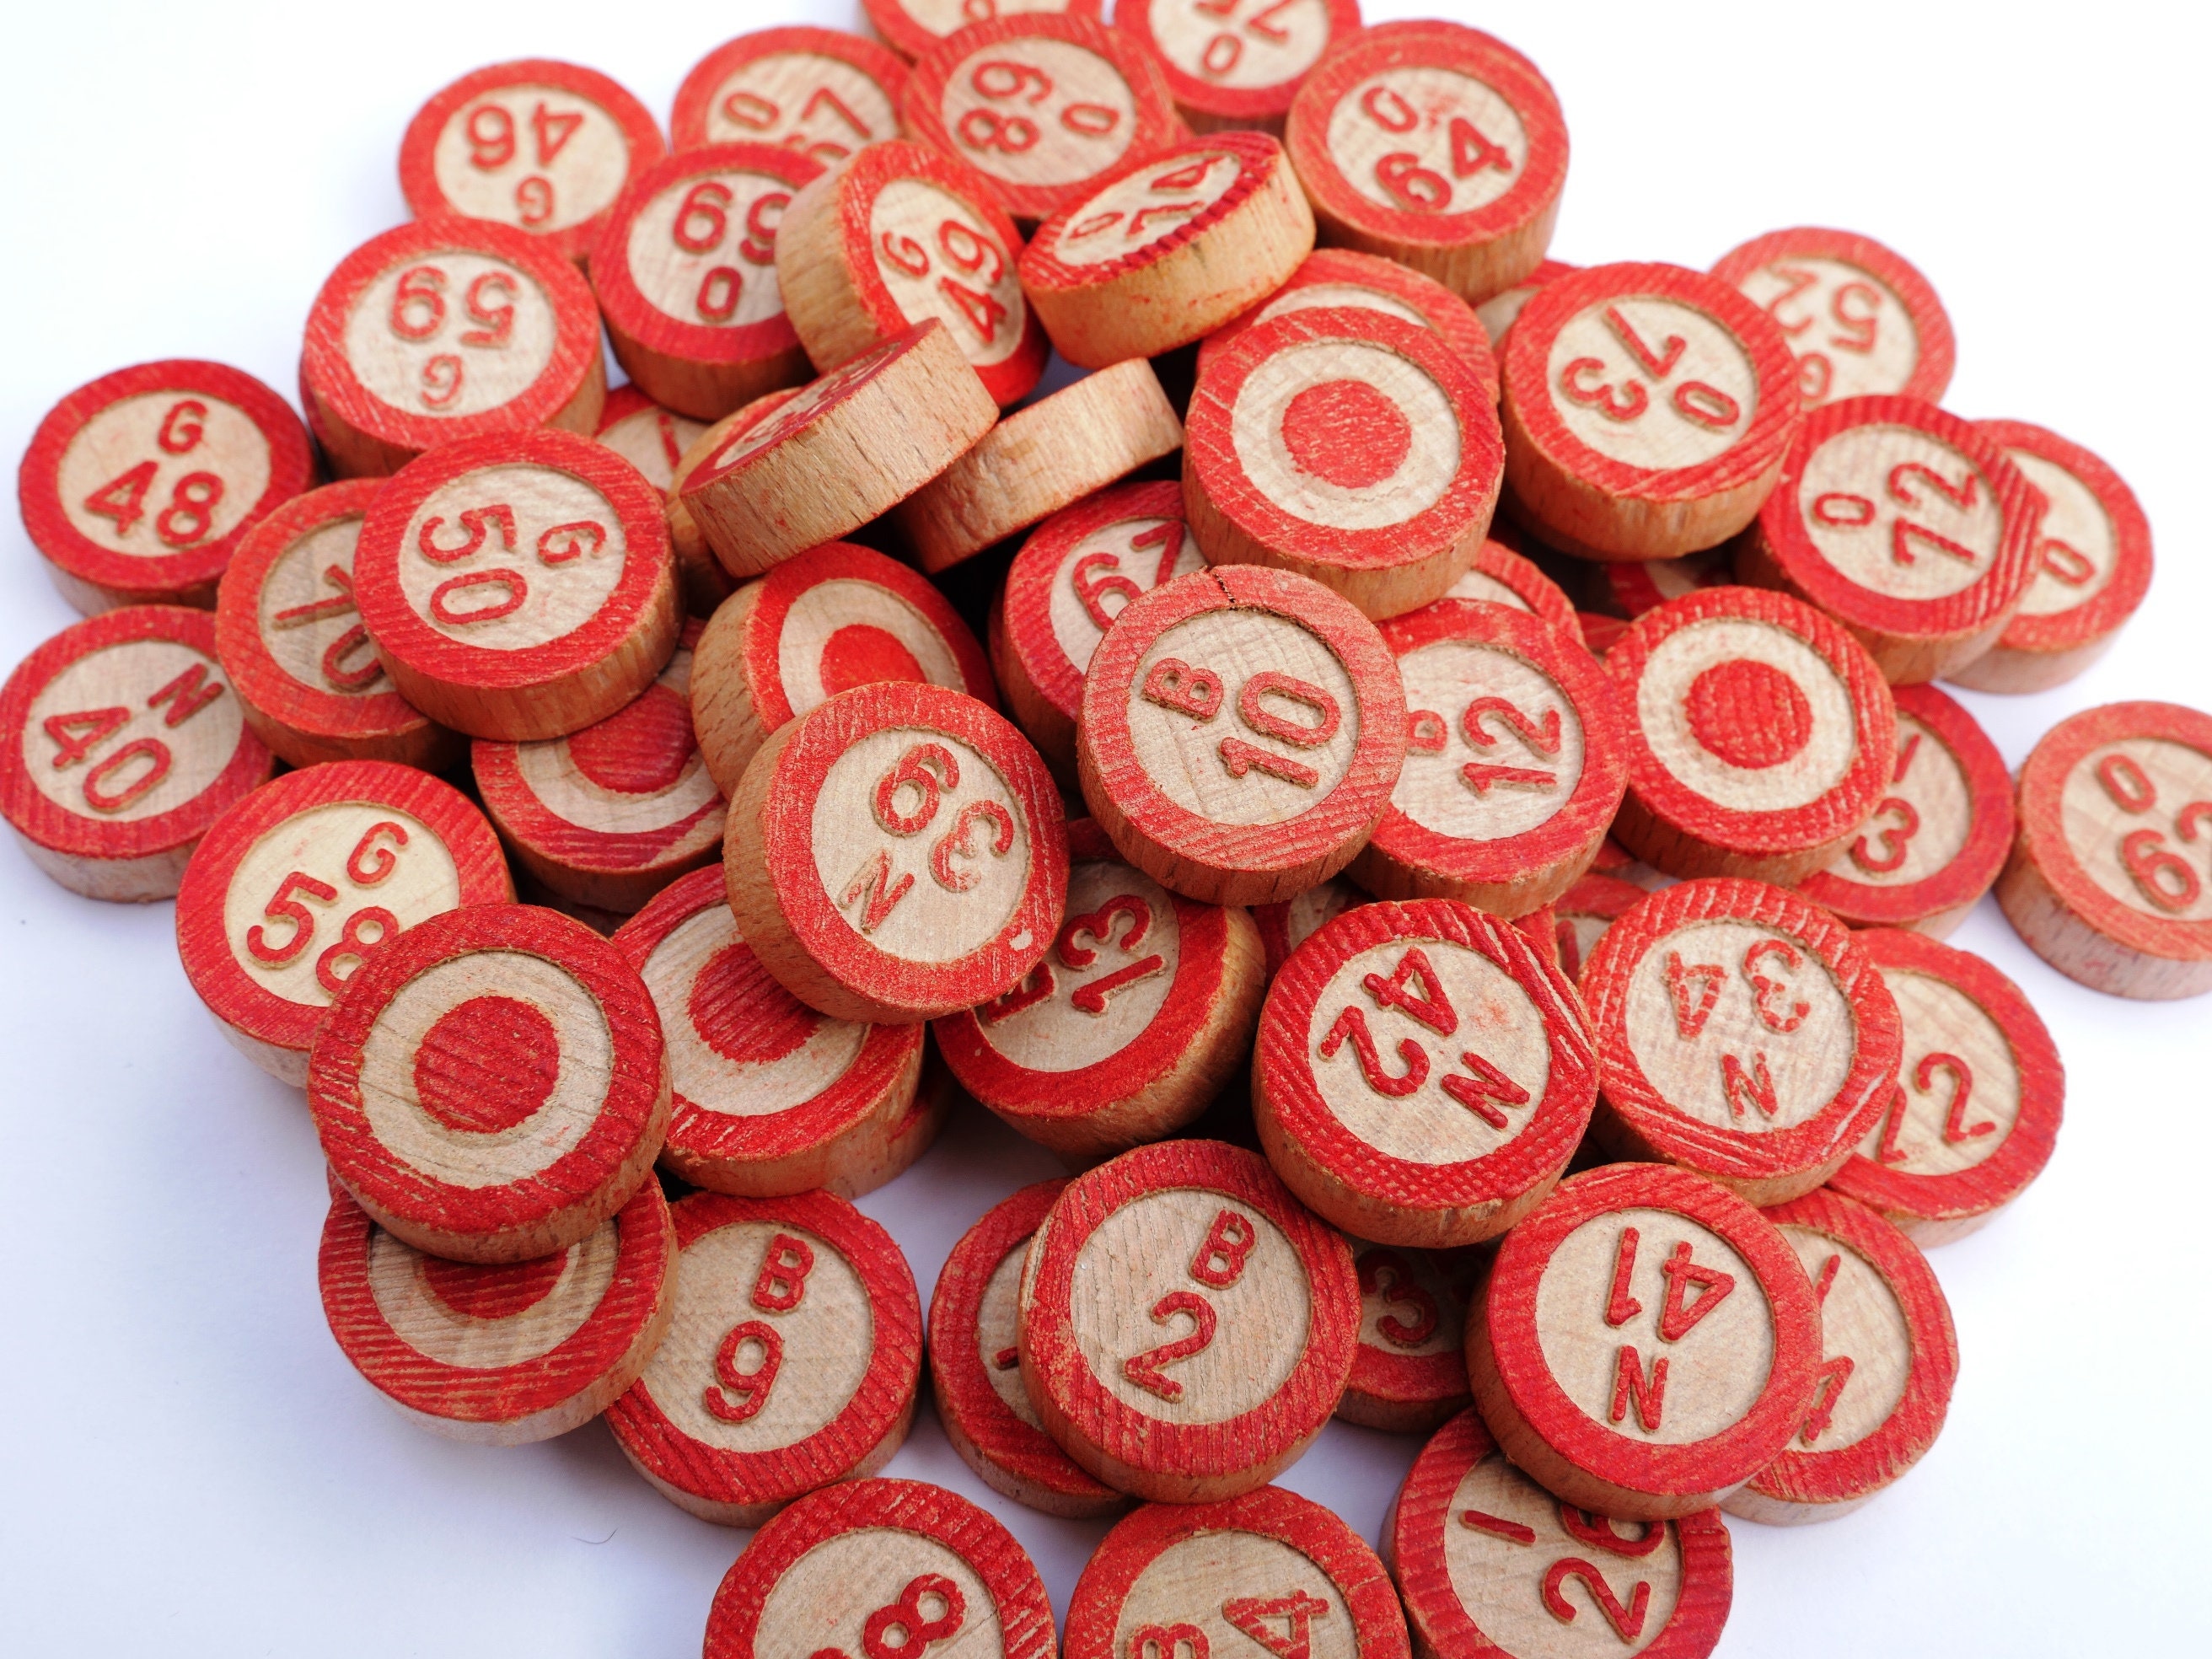 Bingo Markers 1 INCH Printable Squares 1 Inch Circle Punch